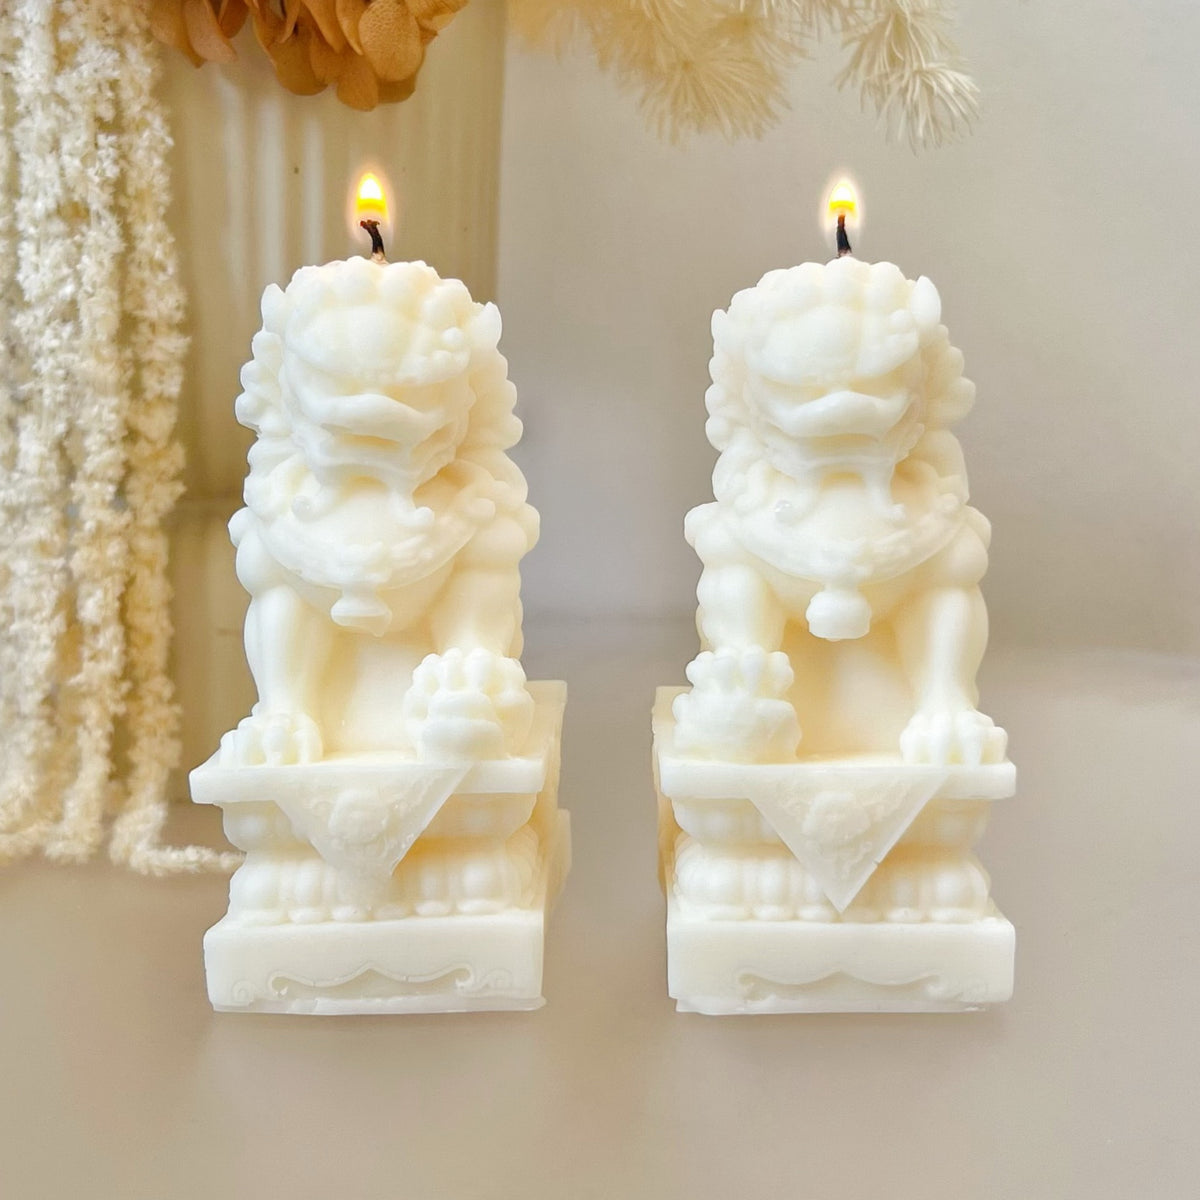 Imperial Guardian Lions Candle, Asian Inspired Candle, LMJ Candles